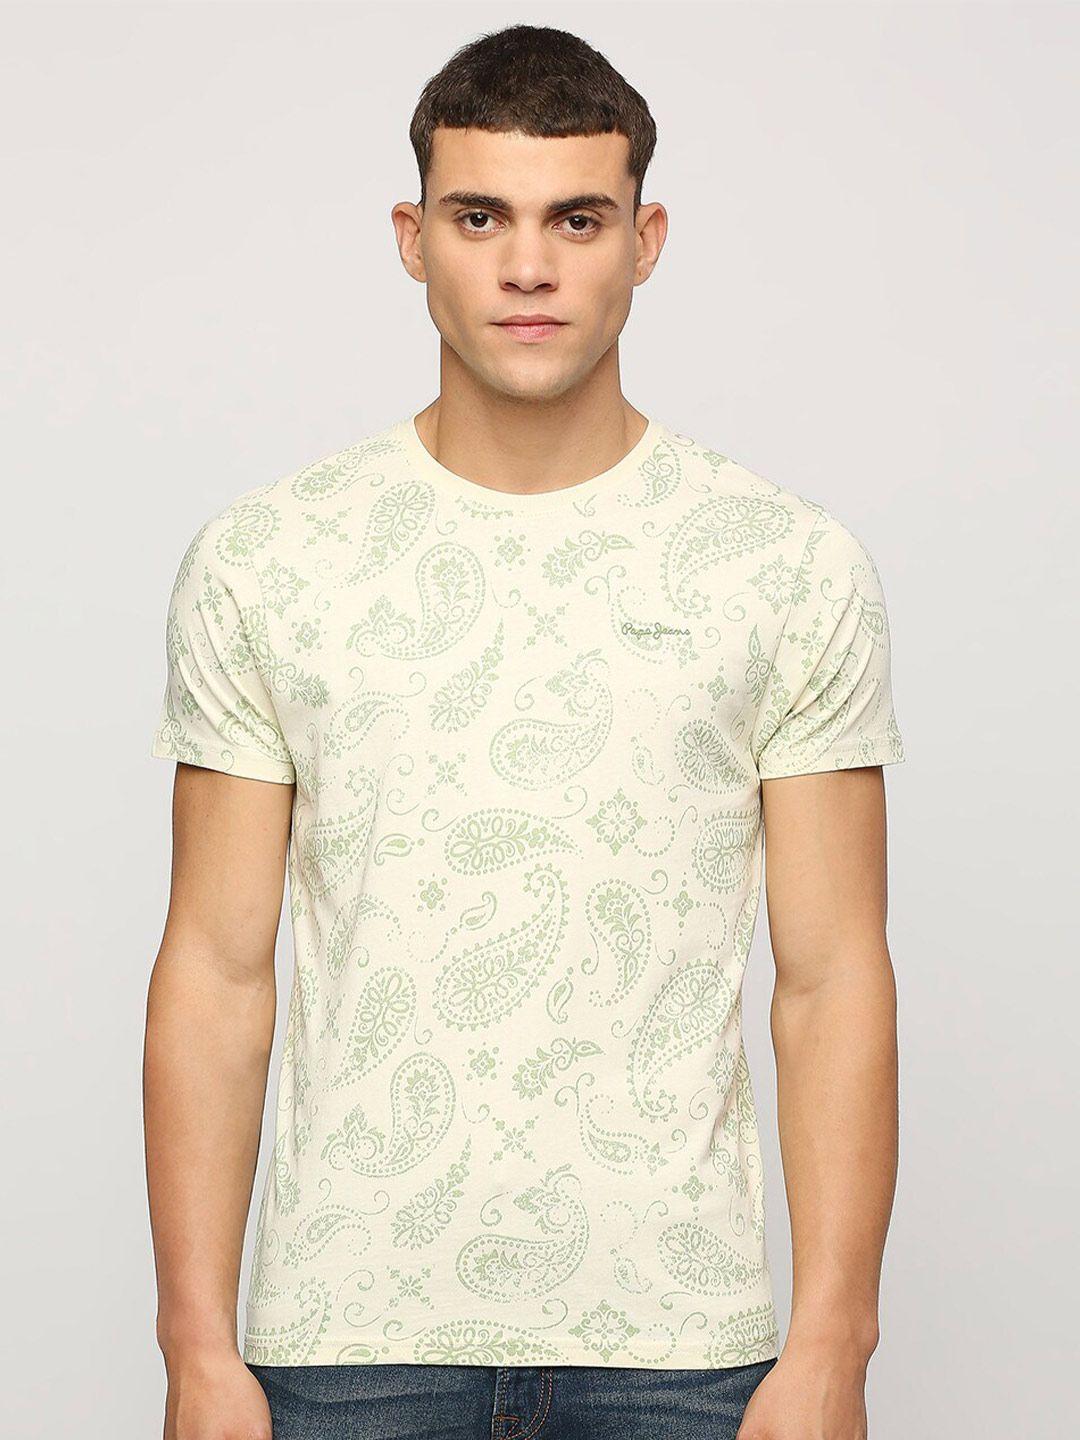 pepe jeans ethnic motifs printed round neck short sleeve pure cotton slim fit t-shirt